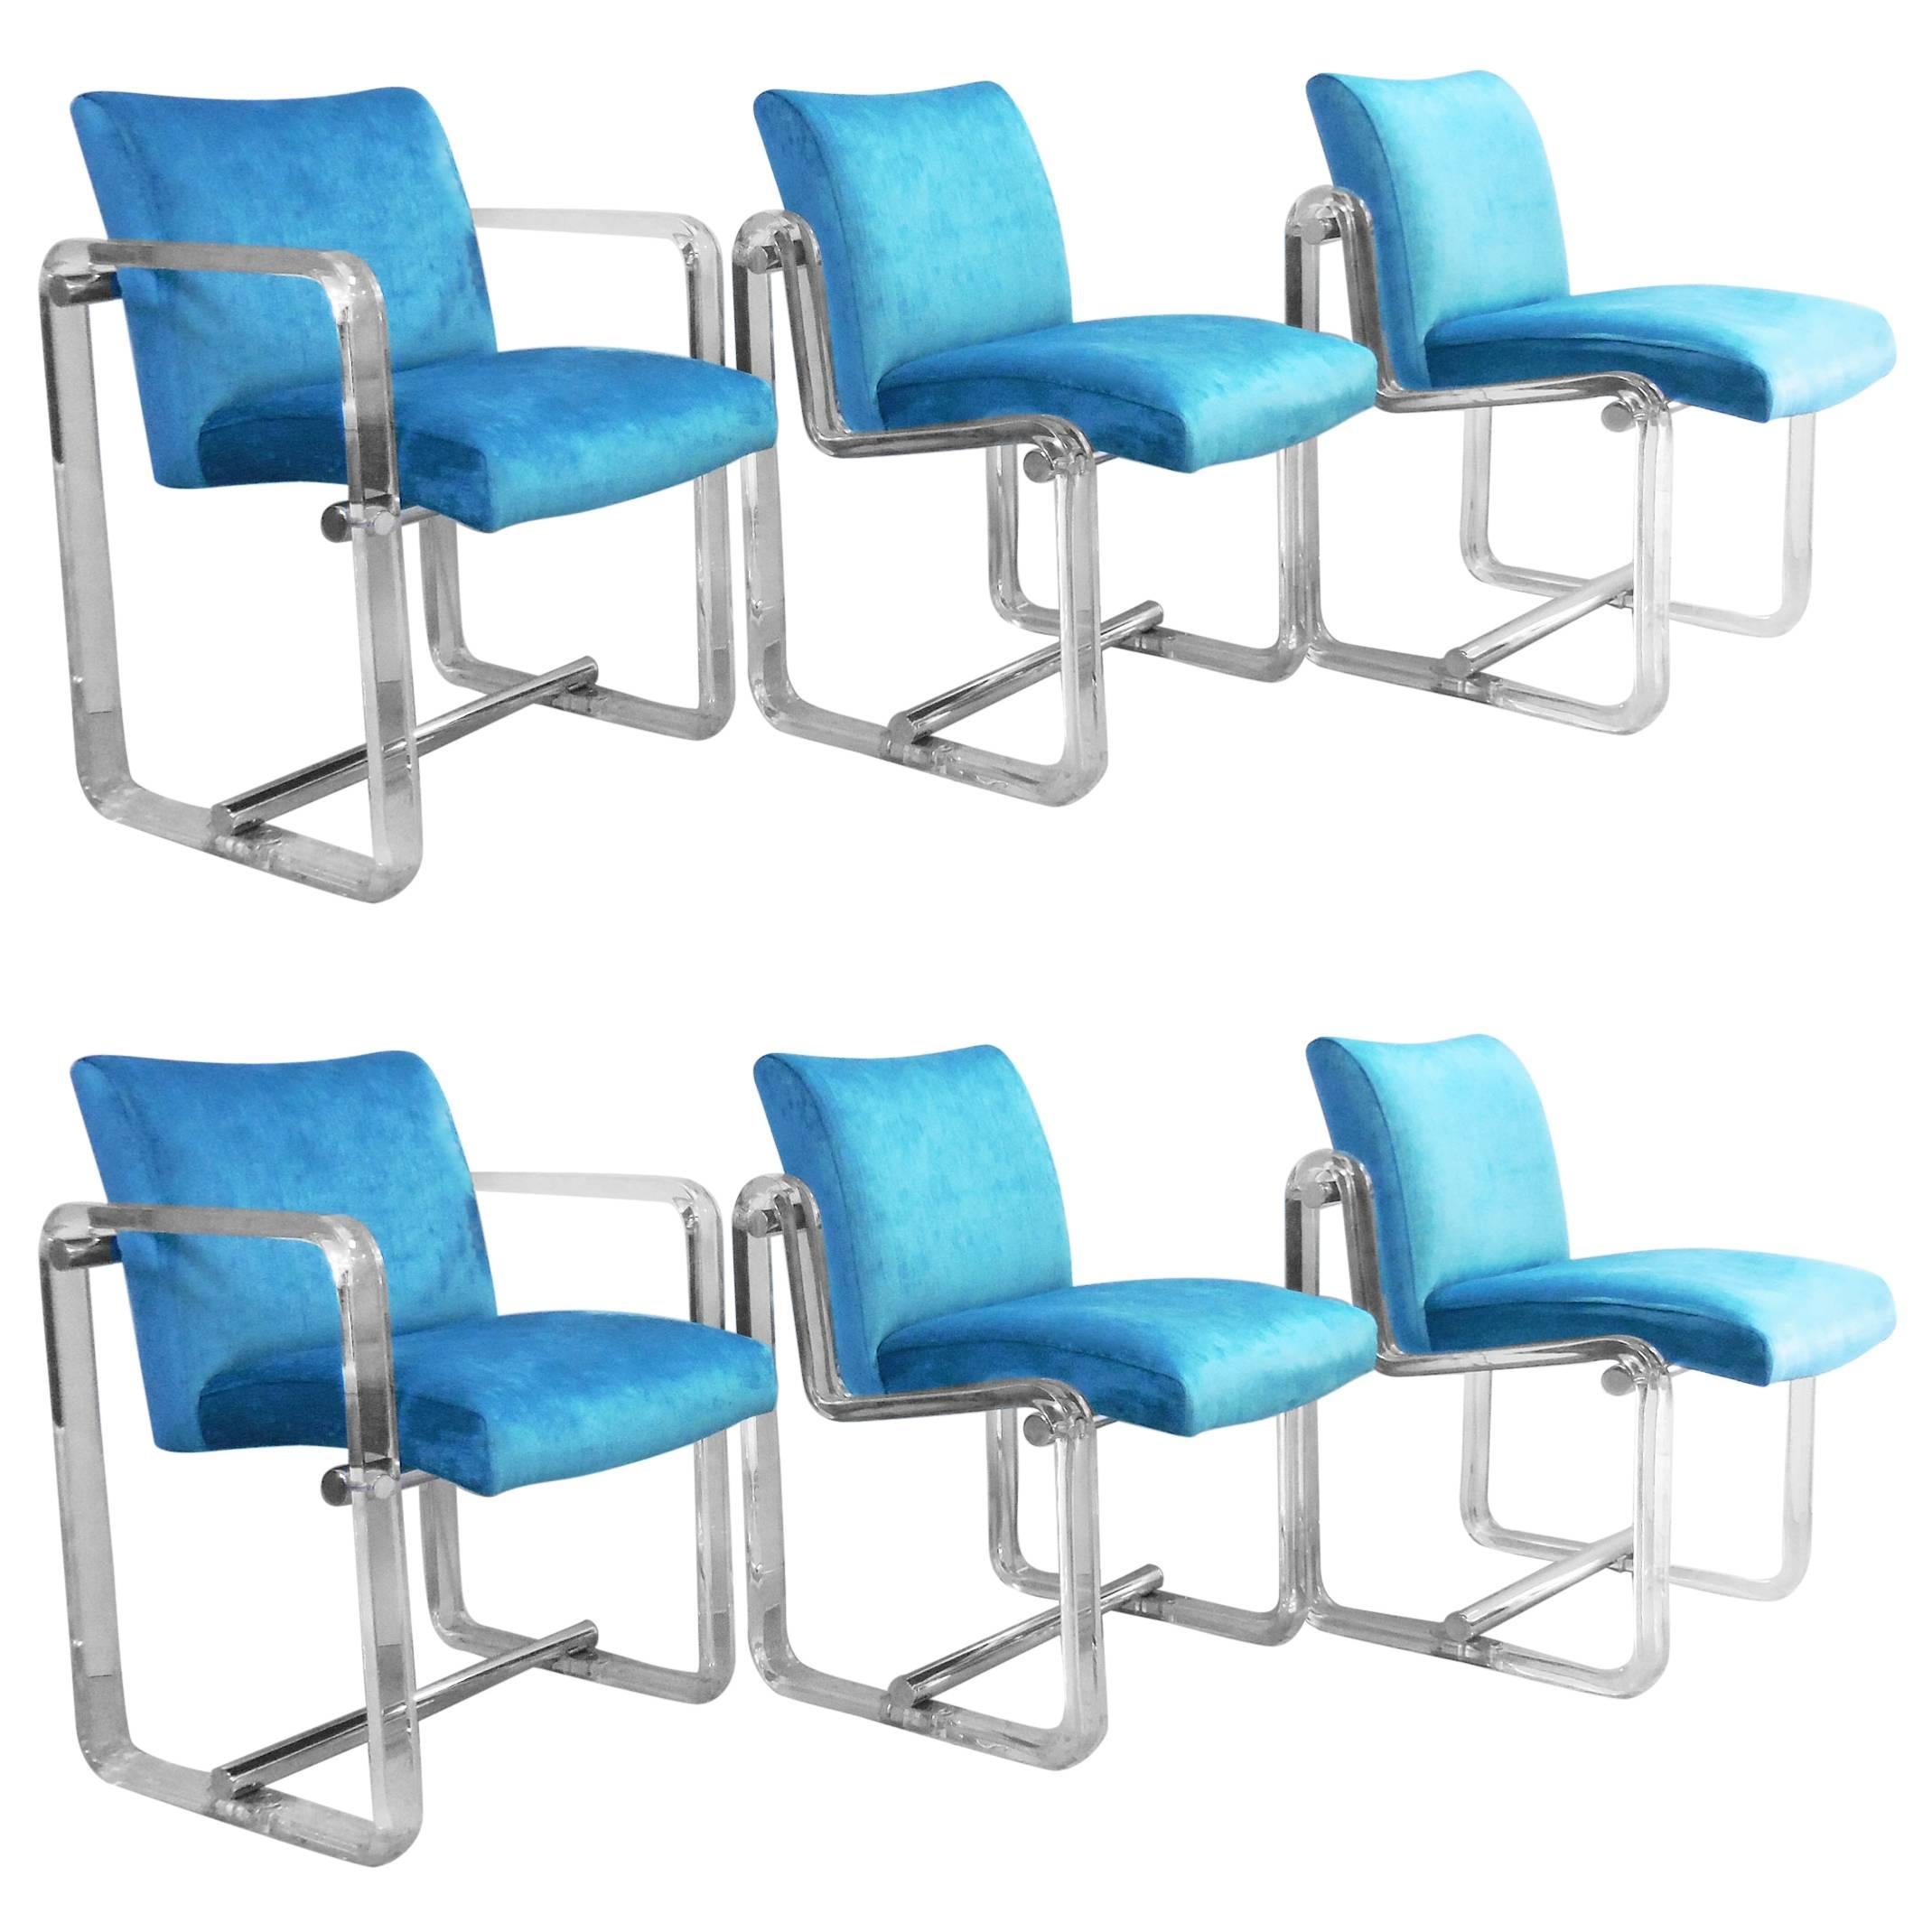 Six Turquoise Lucite and Chrome Dining Chairs, 1970s